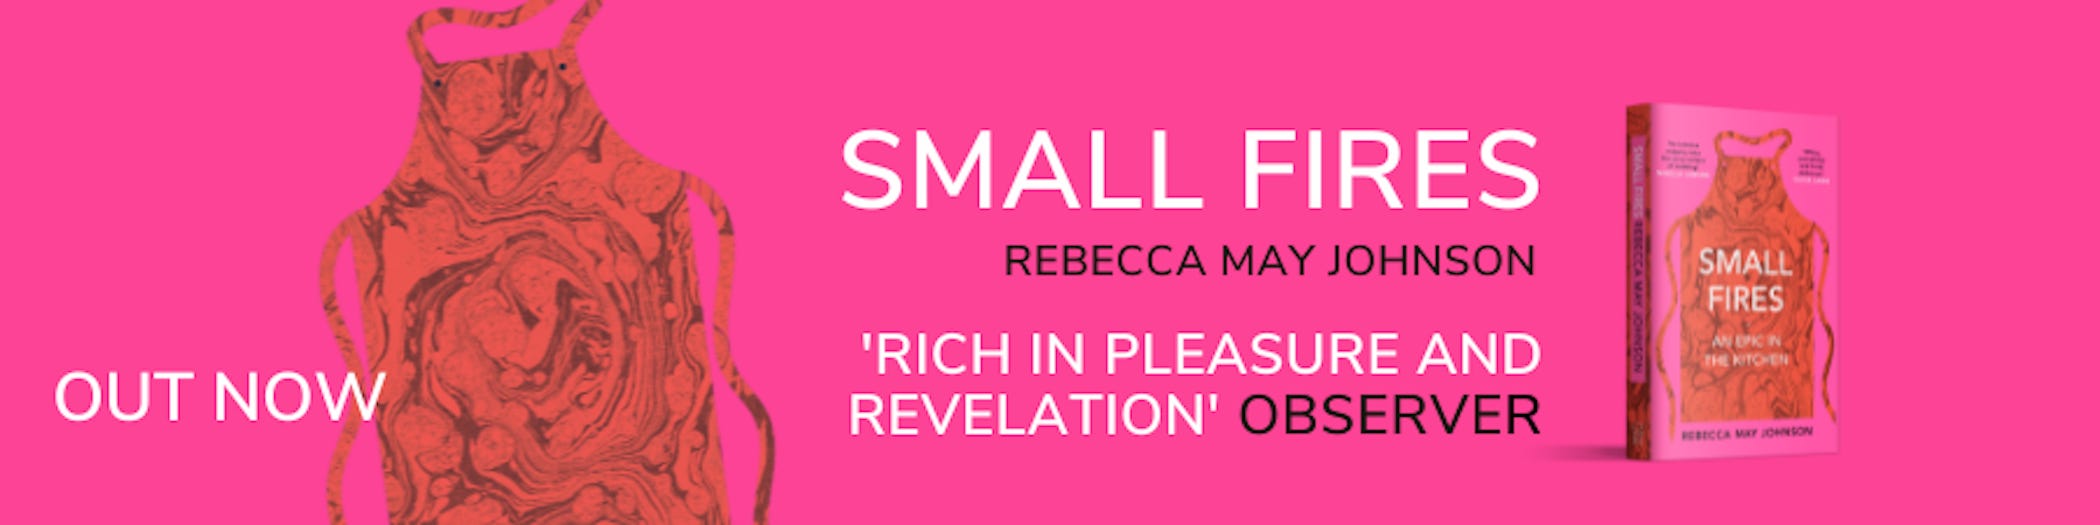 Small Fires by Rebecca May Johnson: 9781911590484